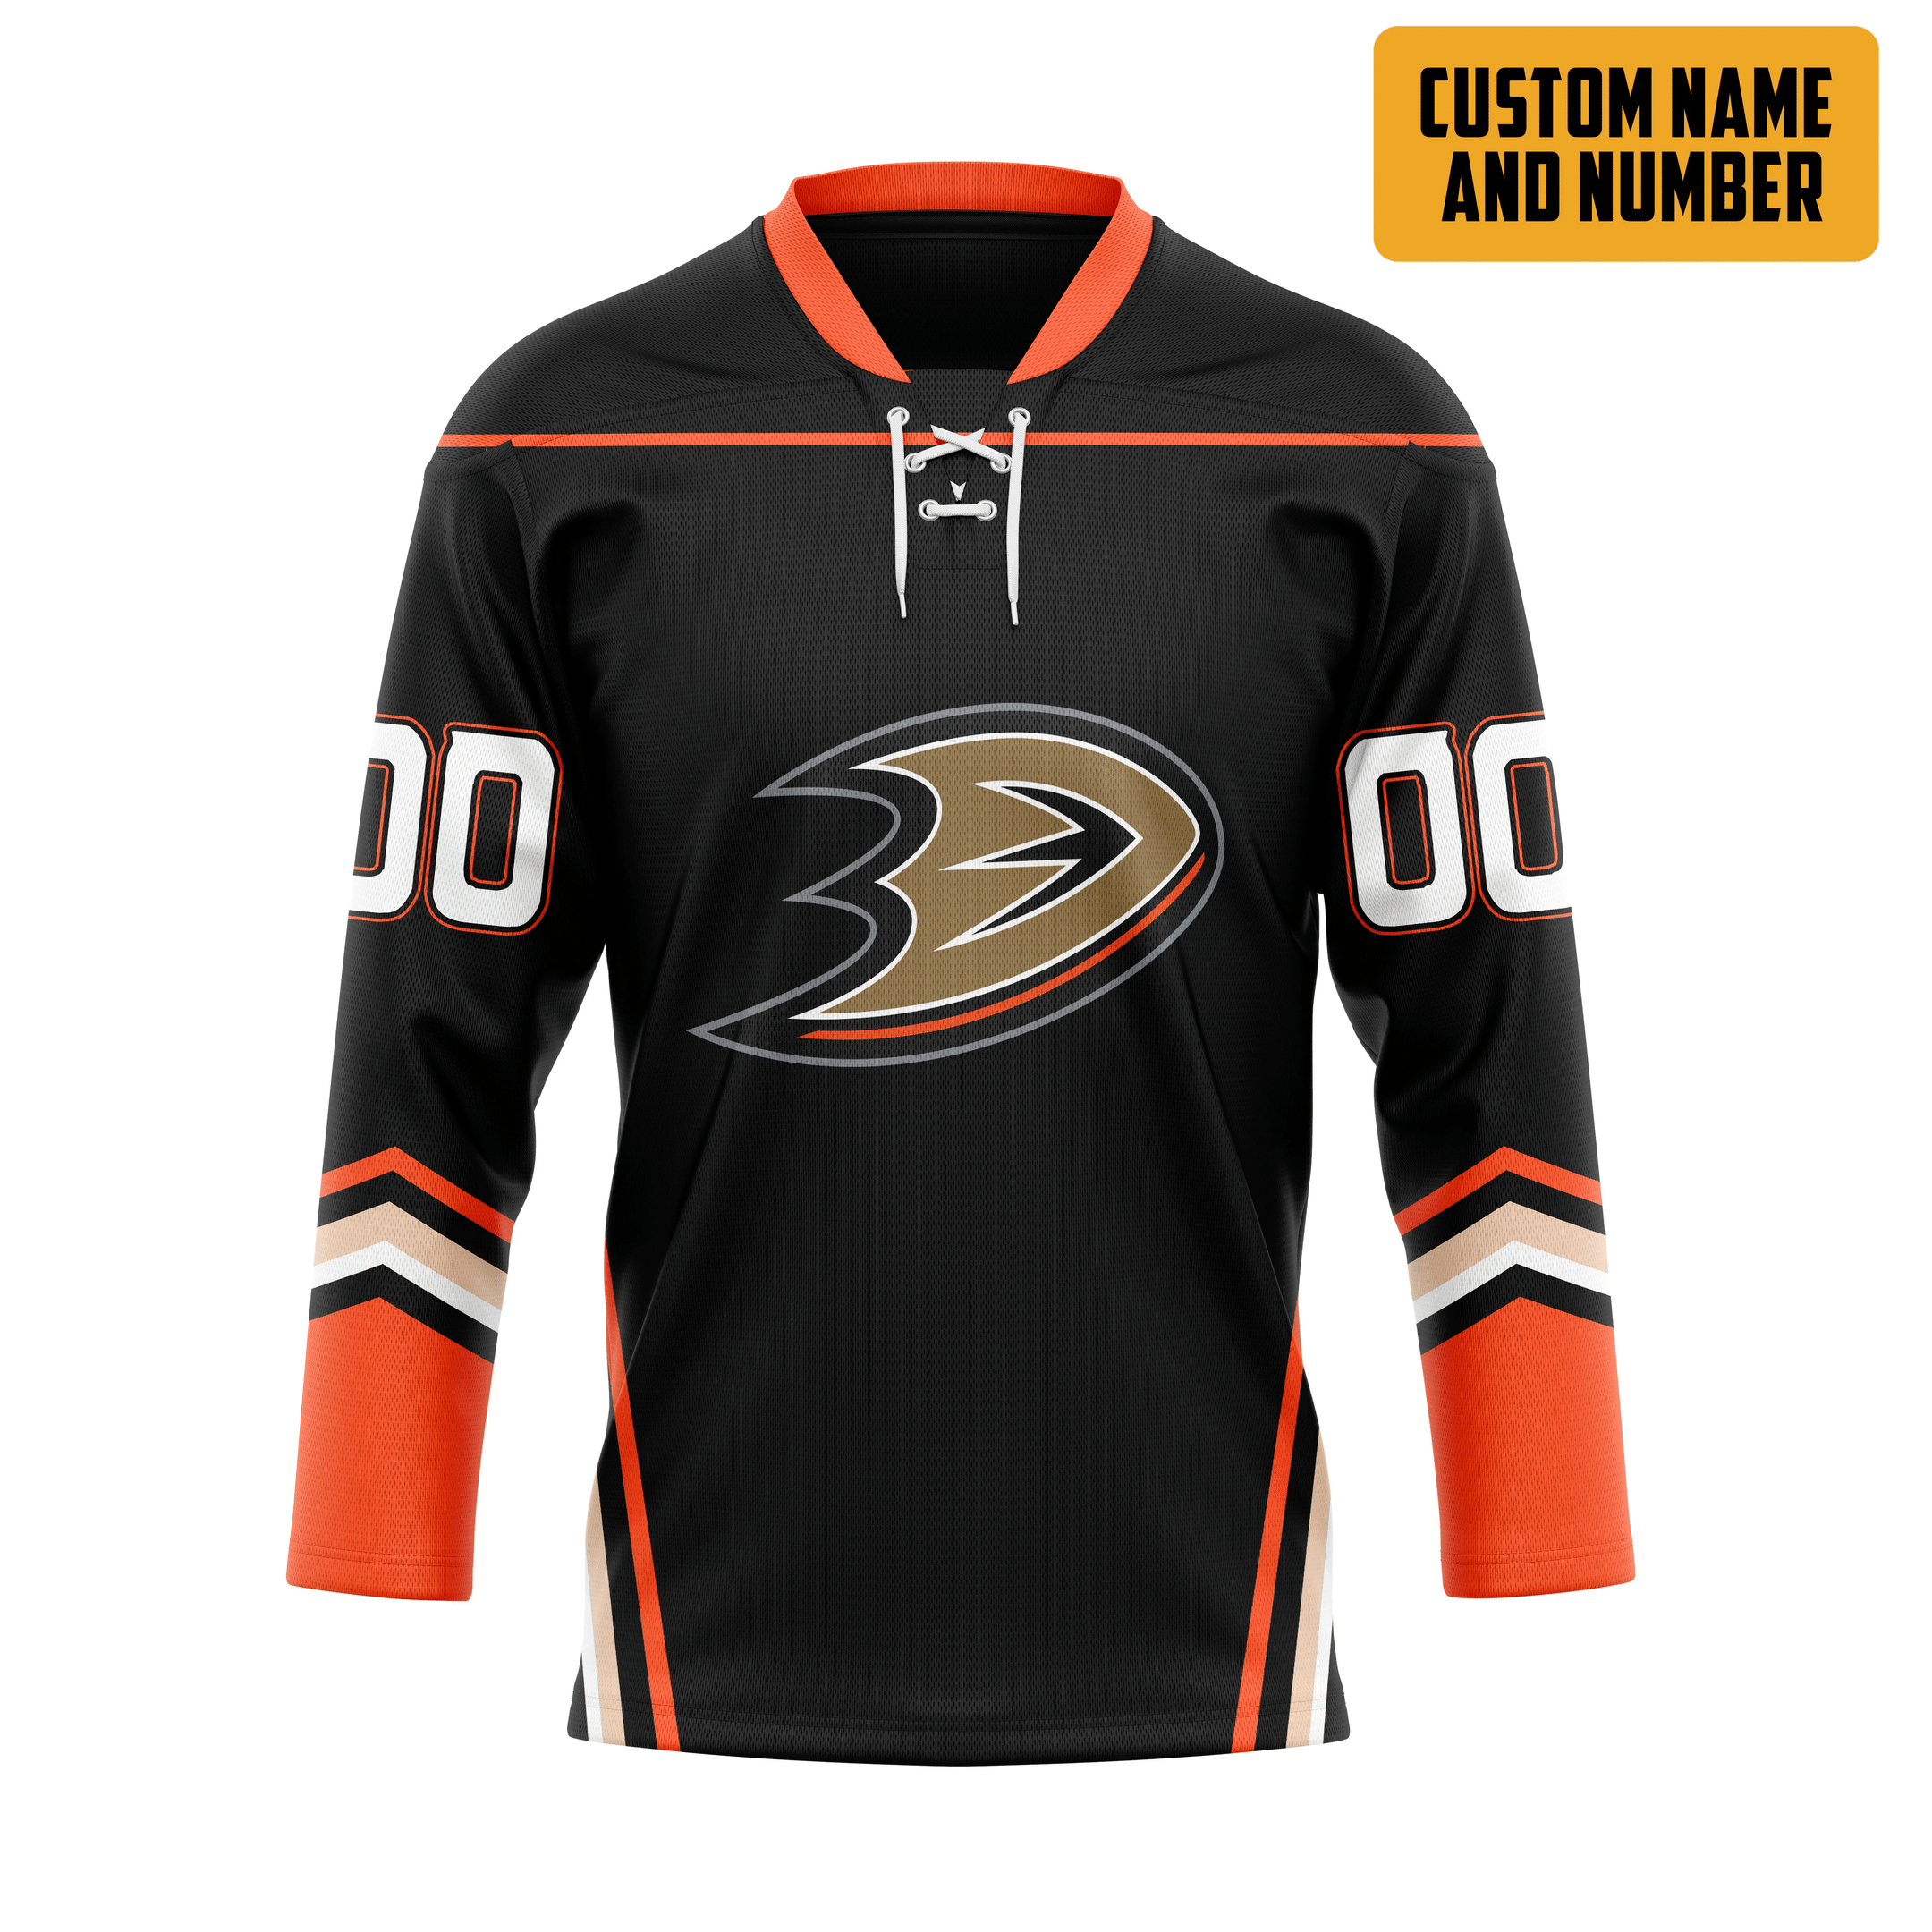 The style of a hockey jersey should match your personality. 69